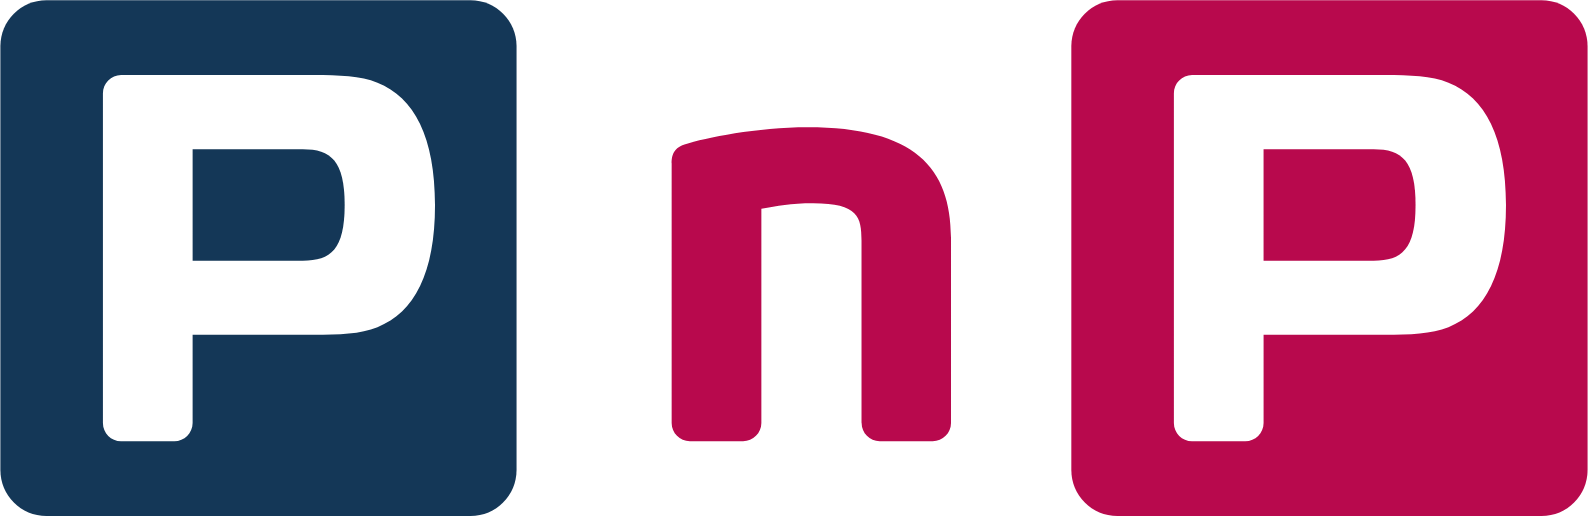 Pick n Pay Stores logo (transparent PNG)